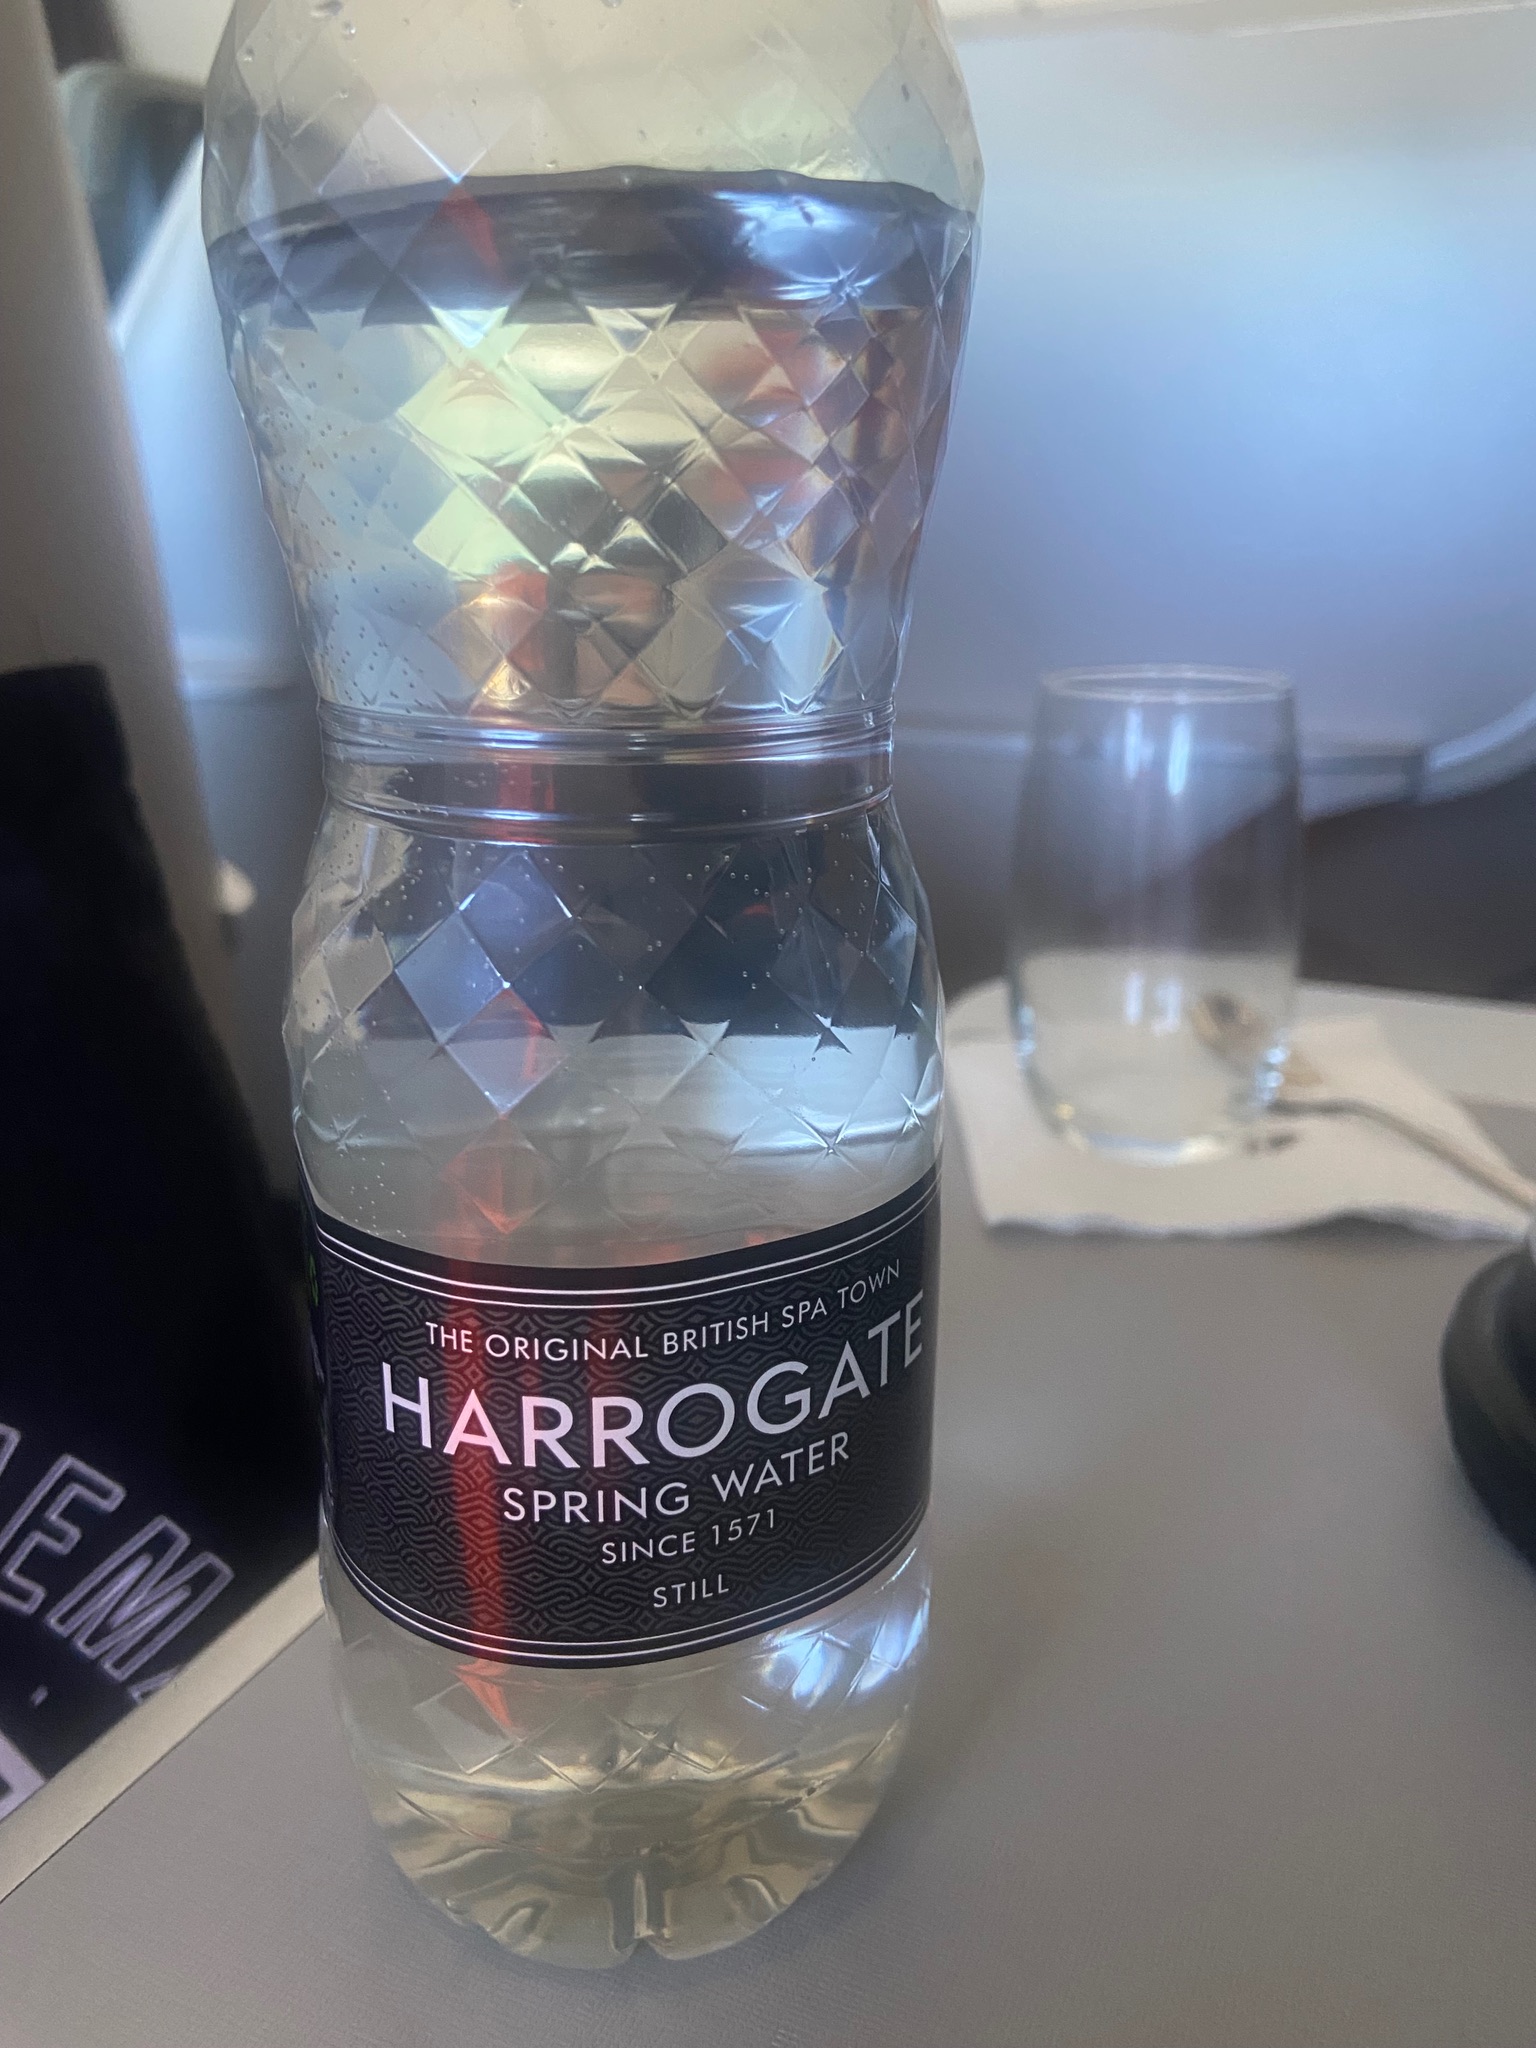 A photo of Malaysia Airlines business class Harrogate Spring water